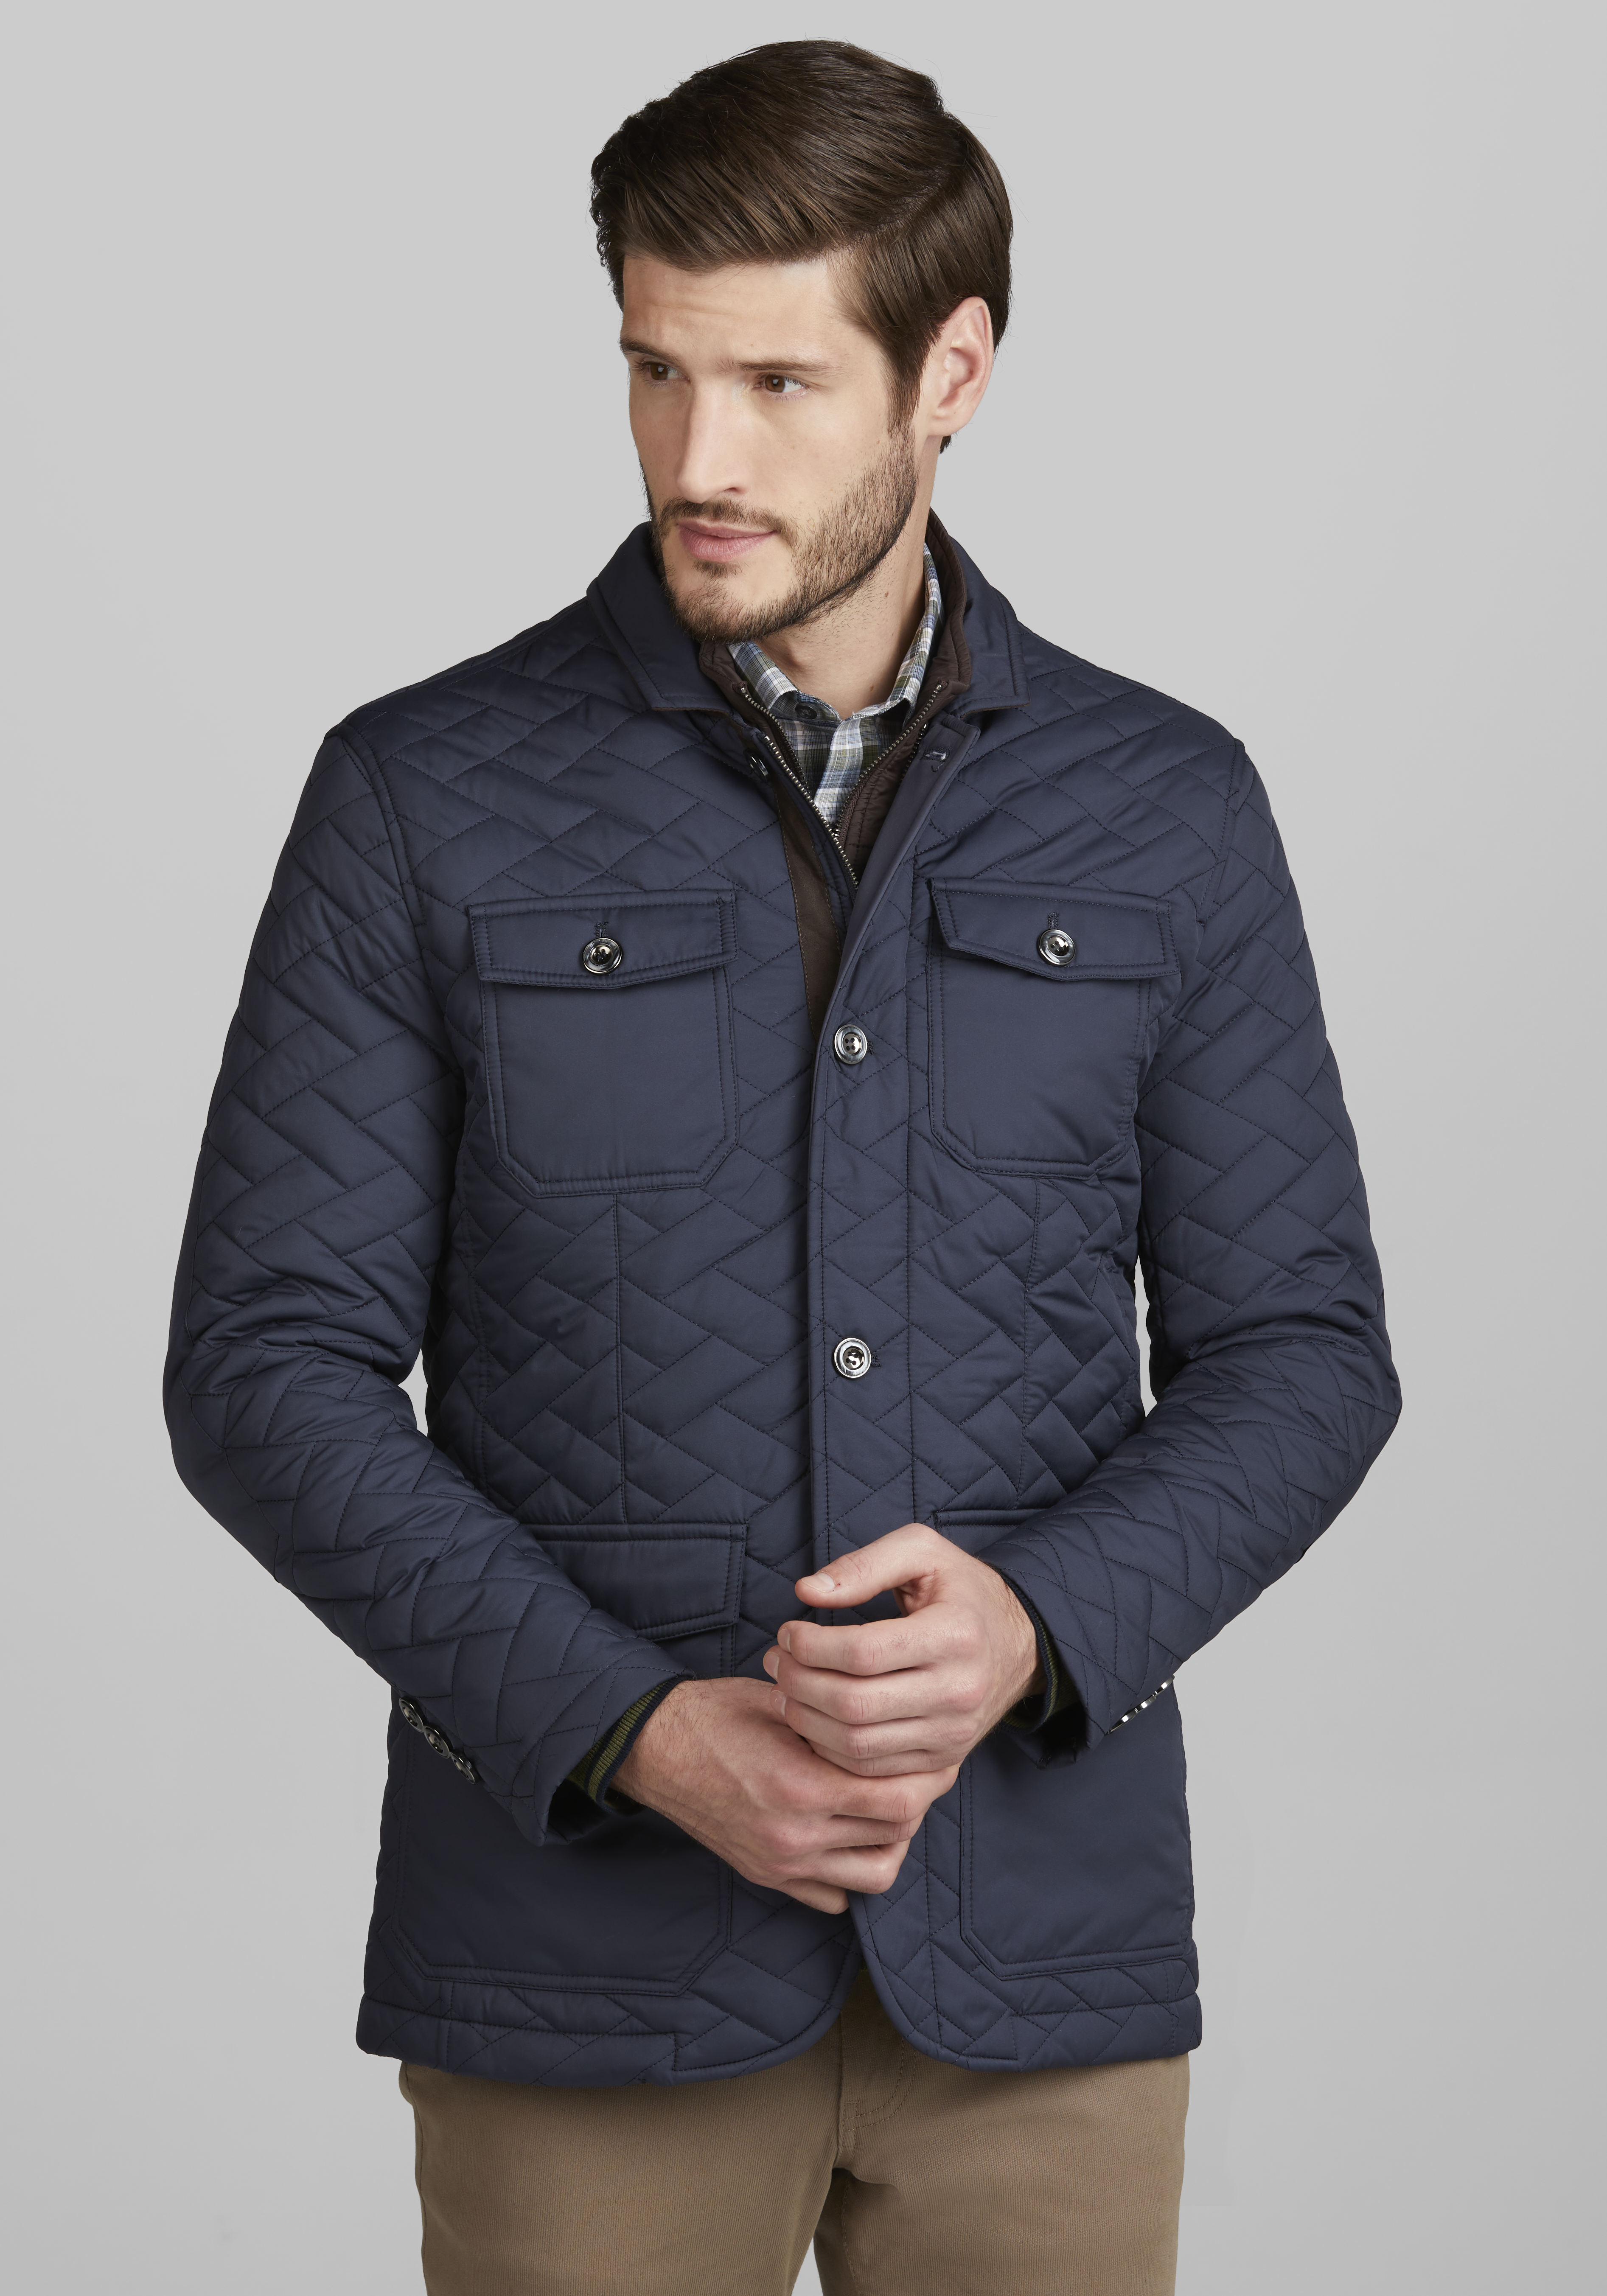 Armoire  Rent this Kenneth Cole Quilted Faux Leather Front Pocket Jacket